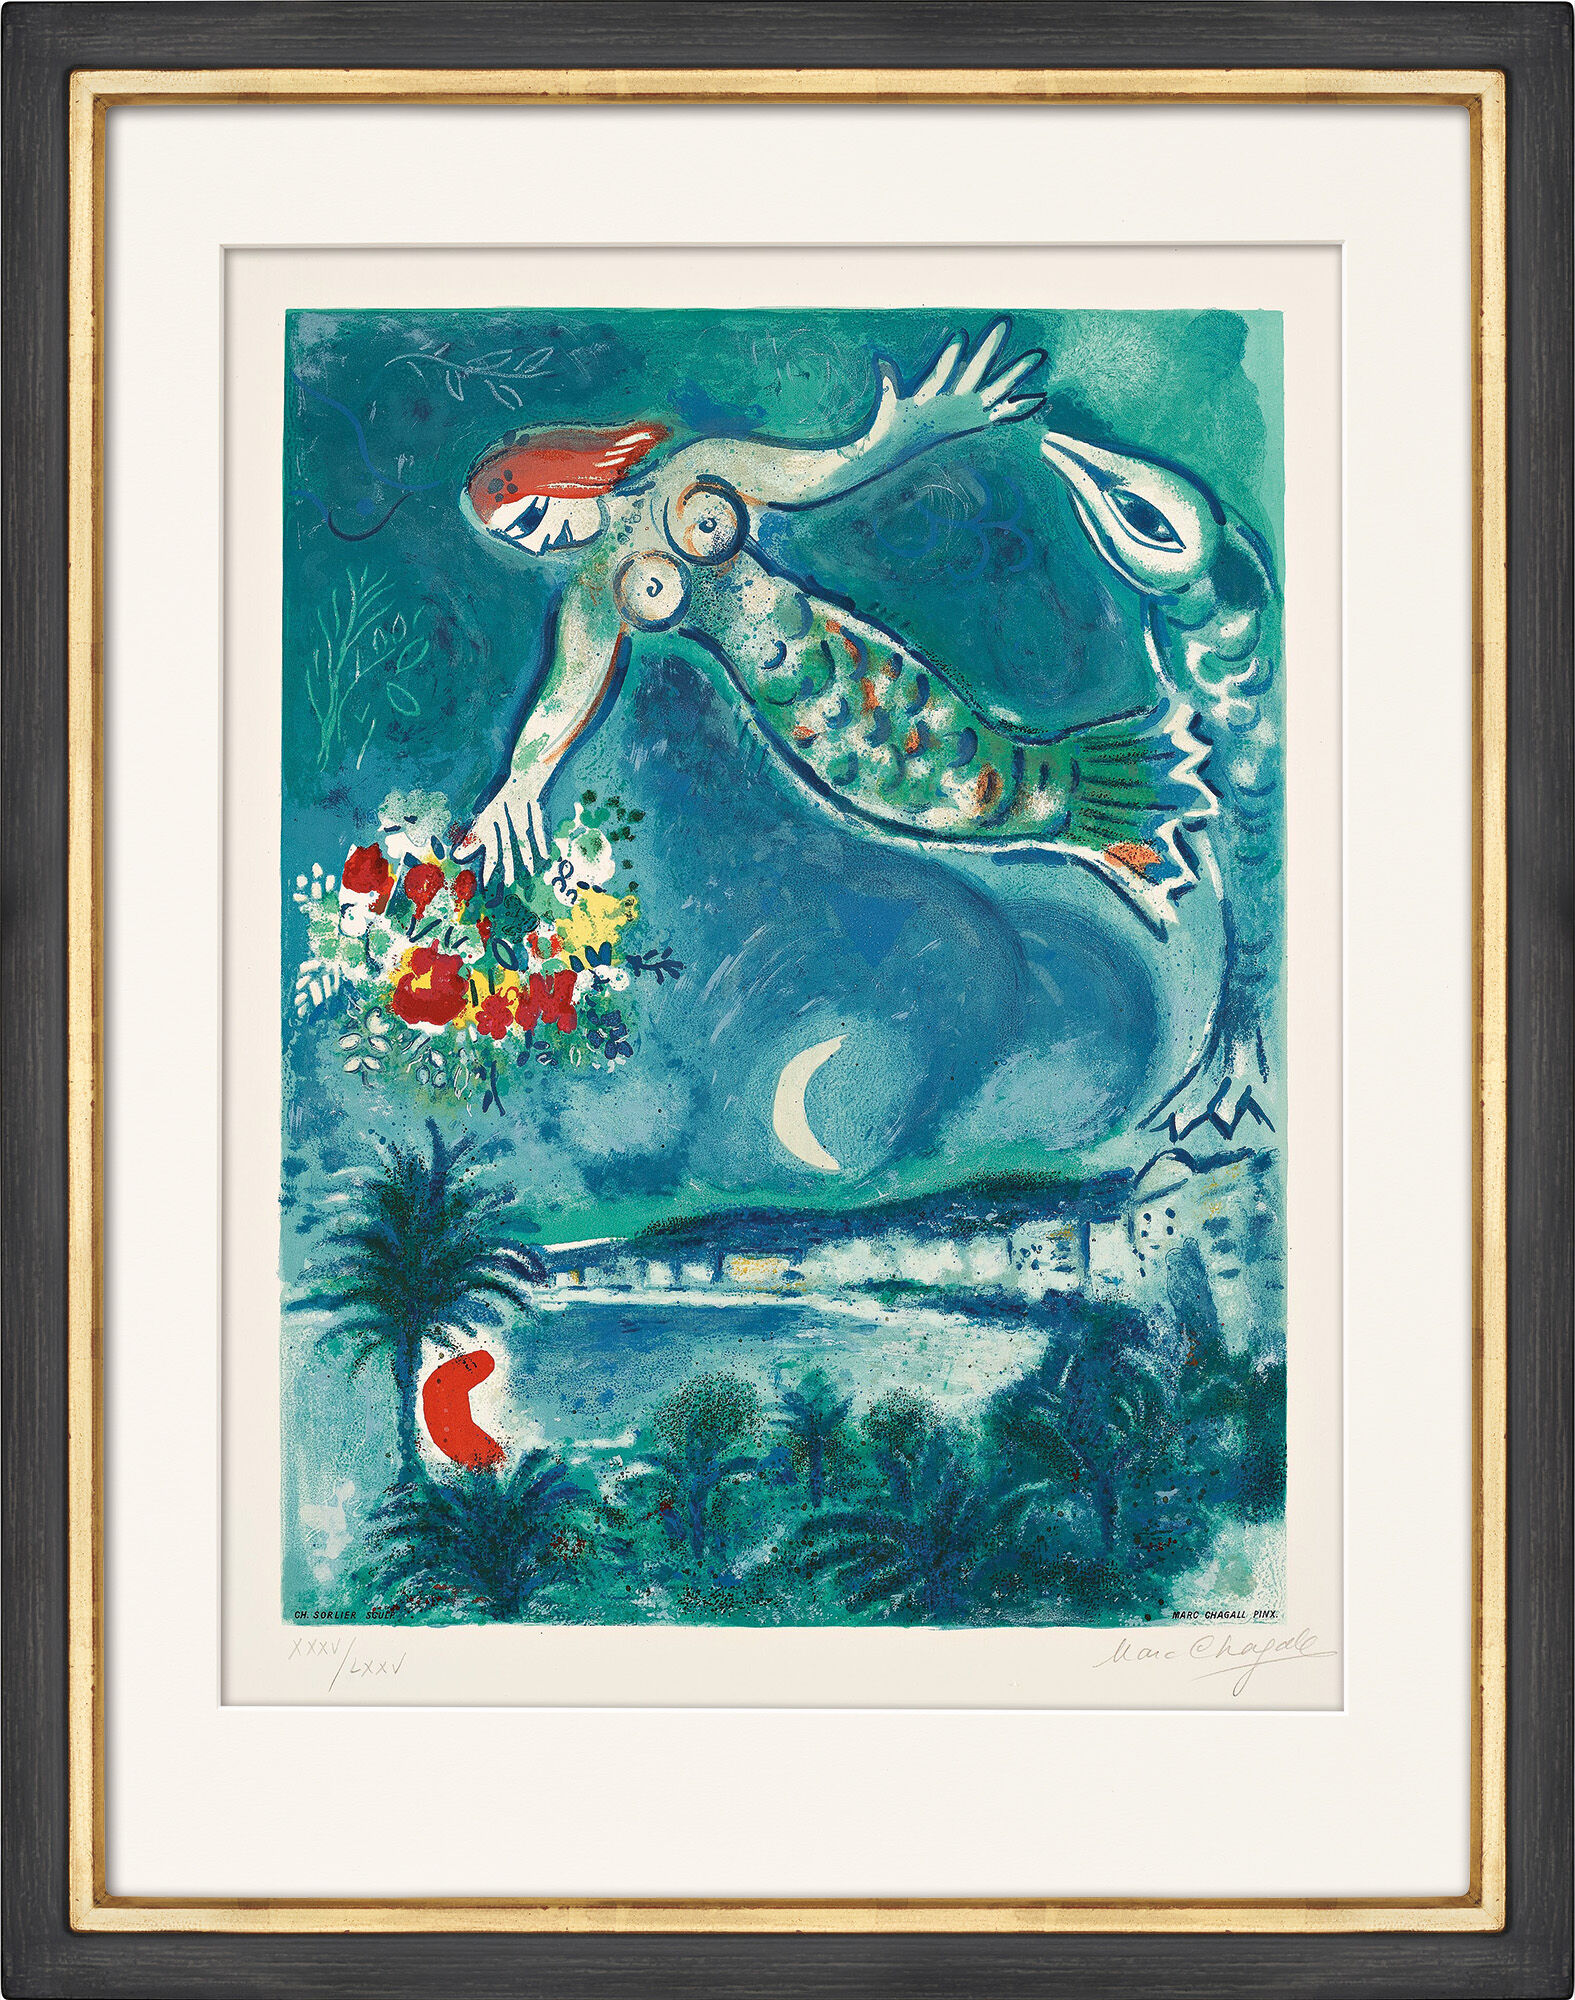 Picture "Sirene et Poisson", from "Nice and the Côte d'Azur" (1967) by Marc Chagall